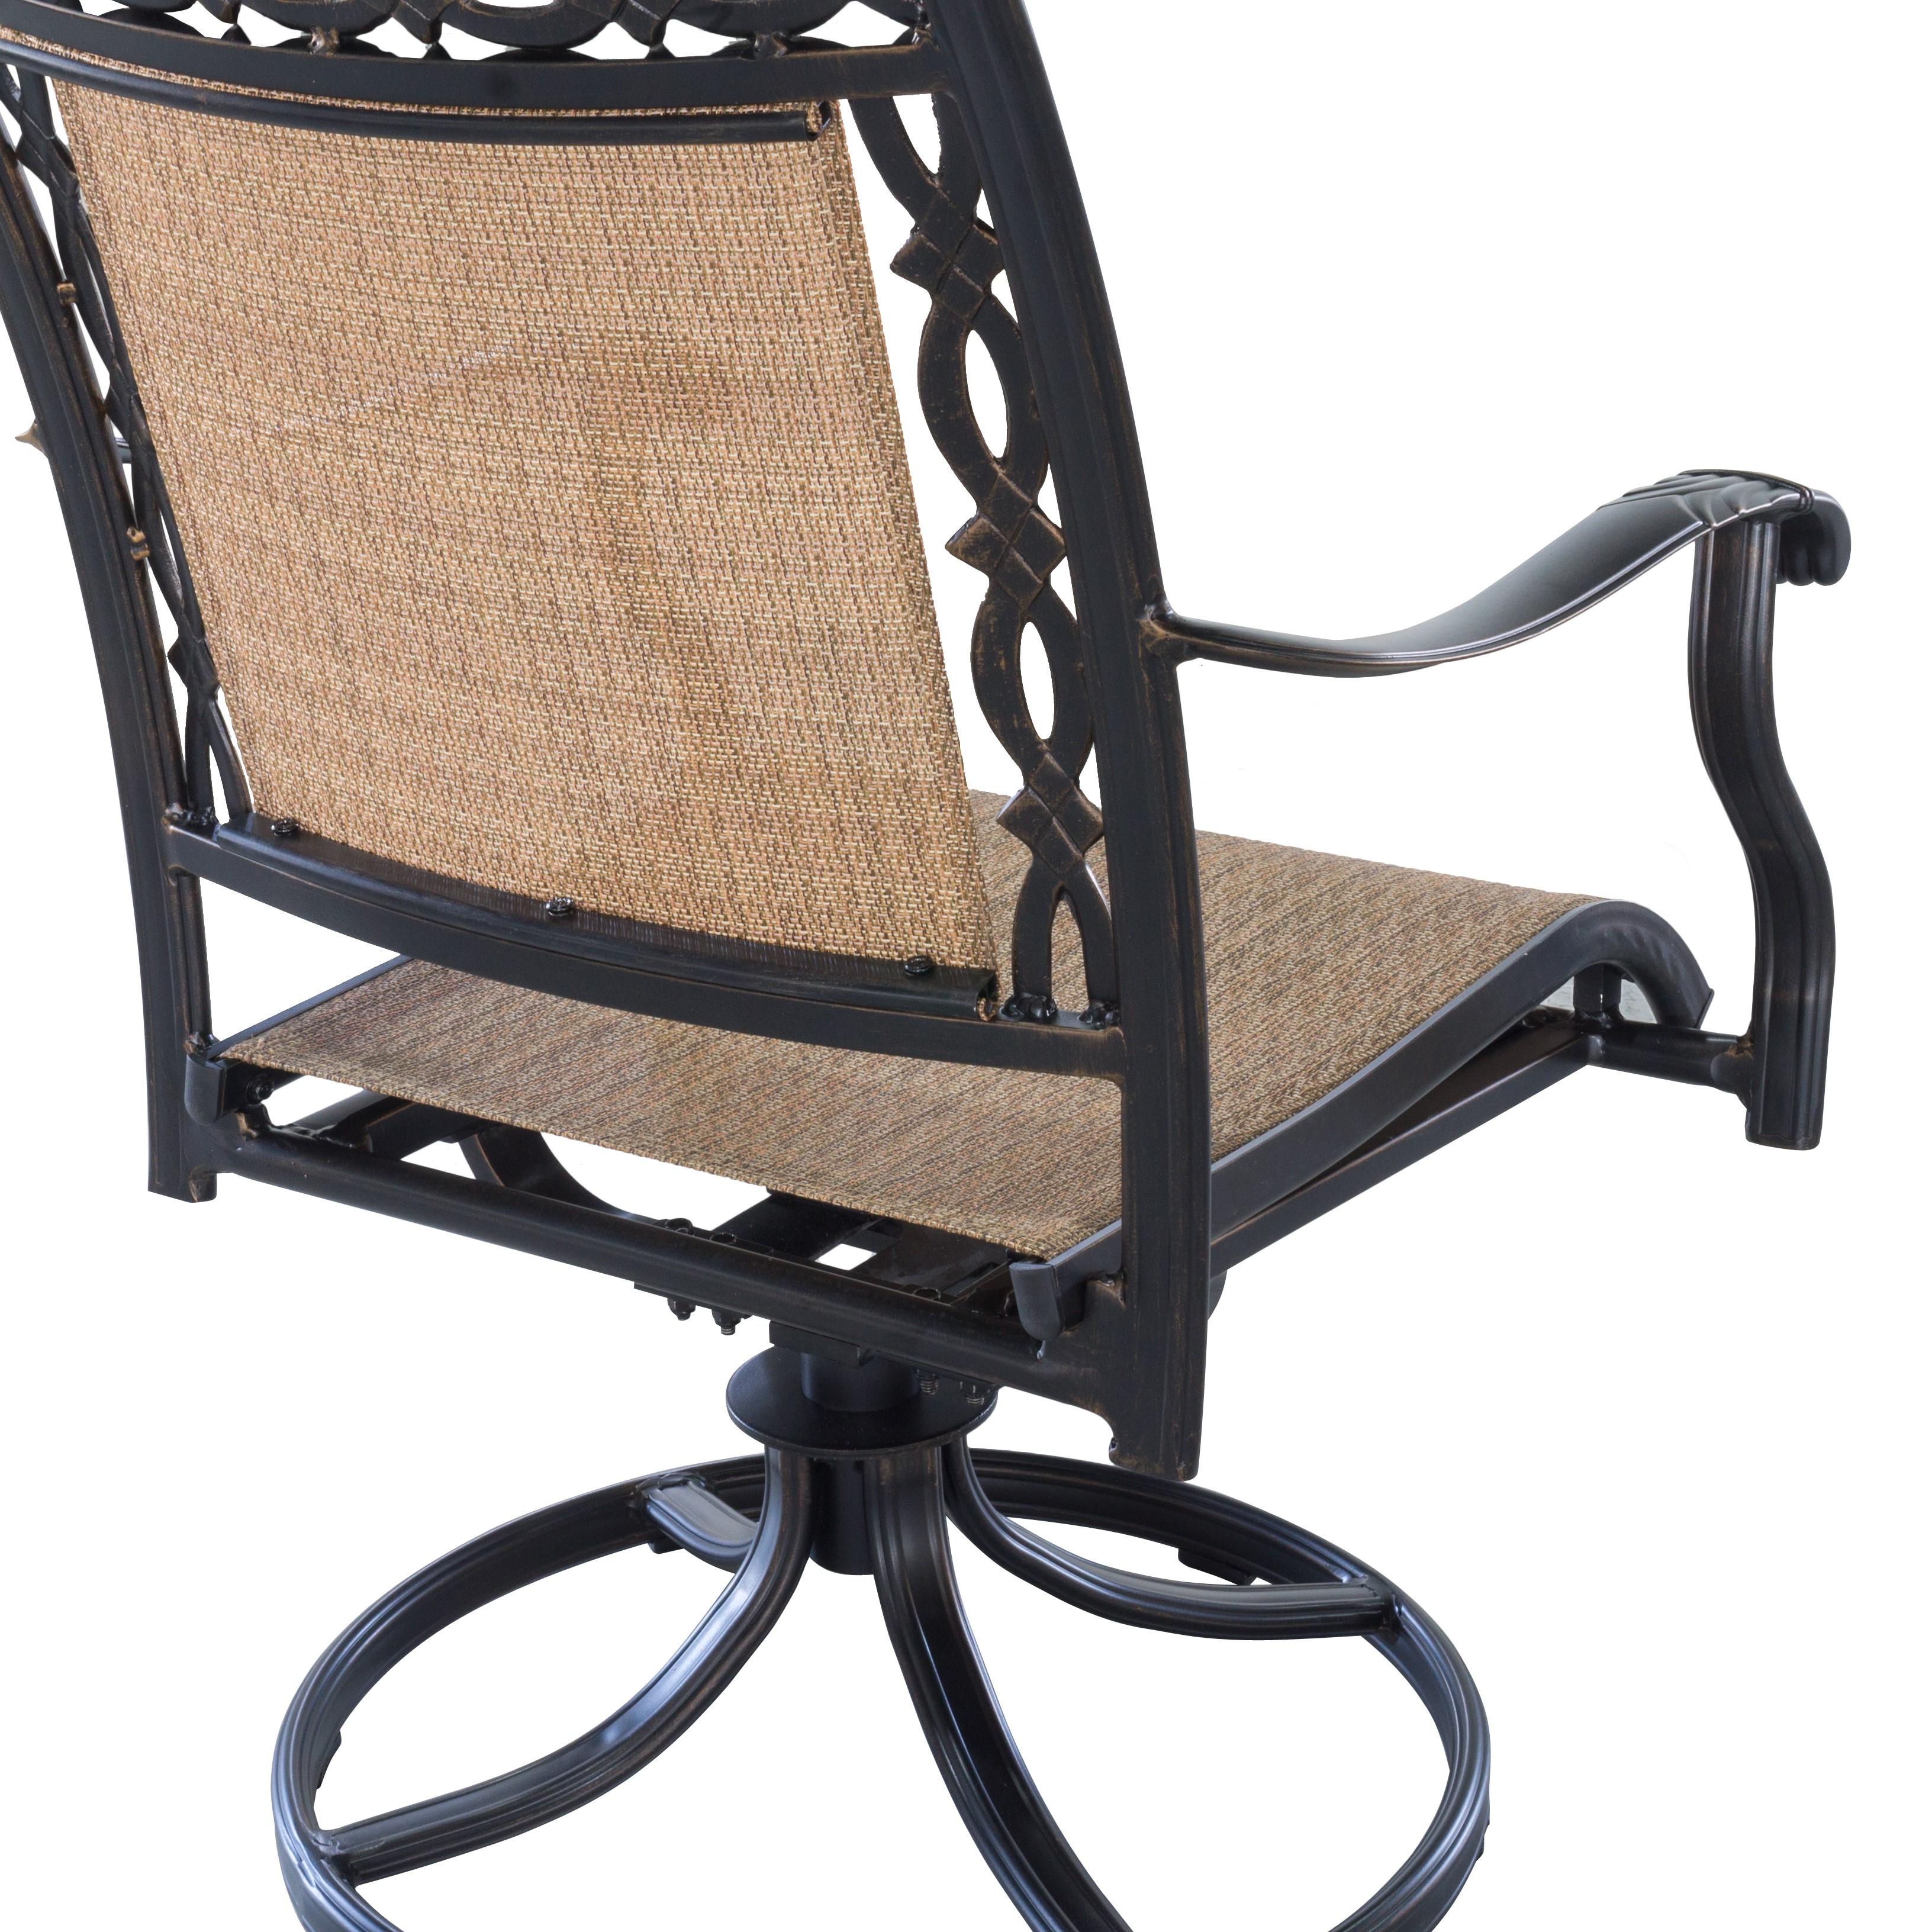 Mondawe 5-Piece Outdoor Patio Cast Aluminum Swivel Chair Set with Round Table(Brown)-Mondawe